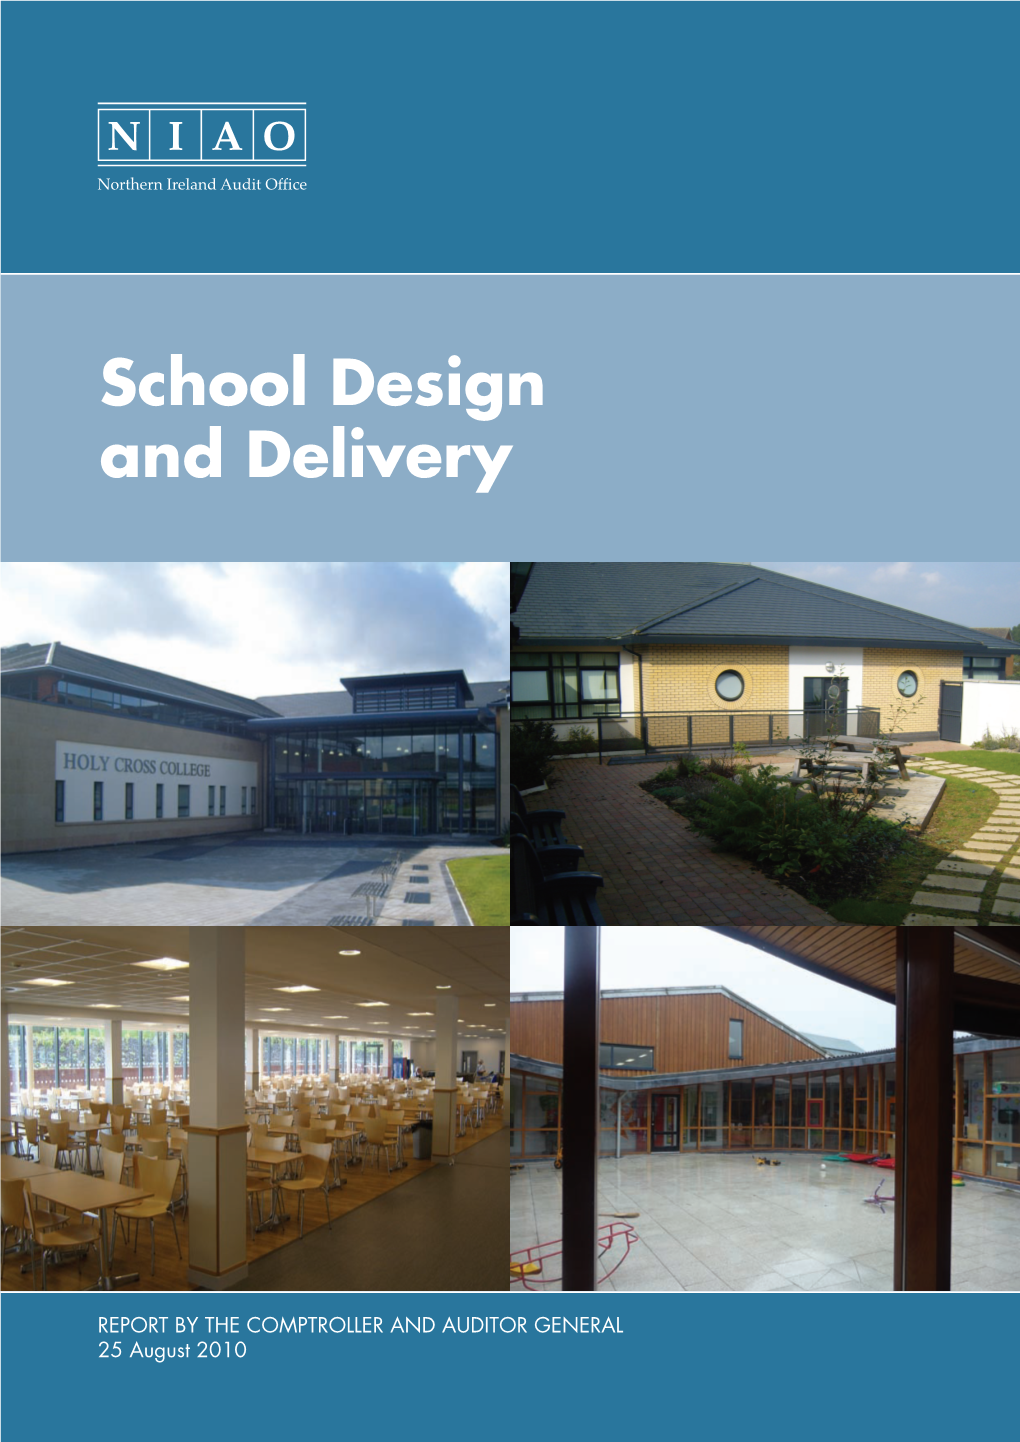 School Design and Delivery